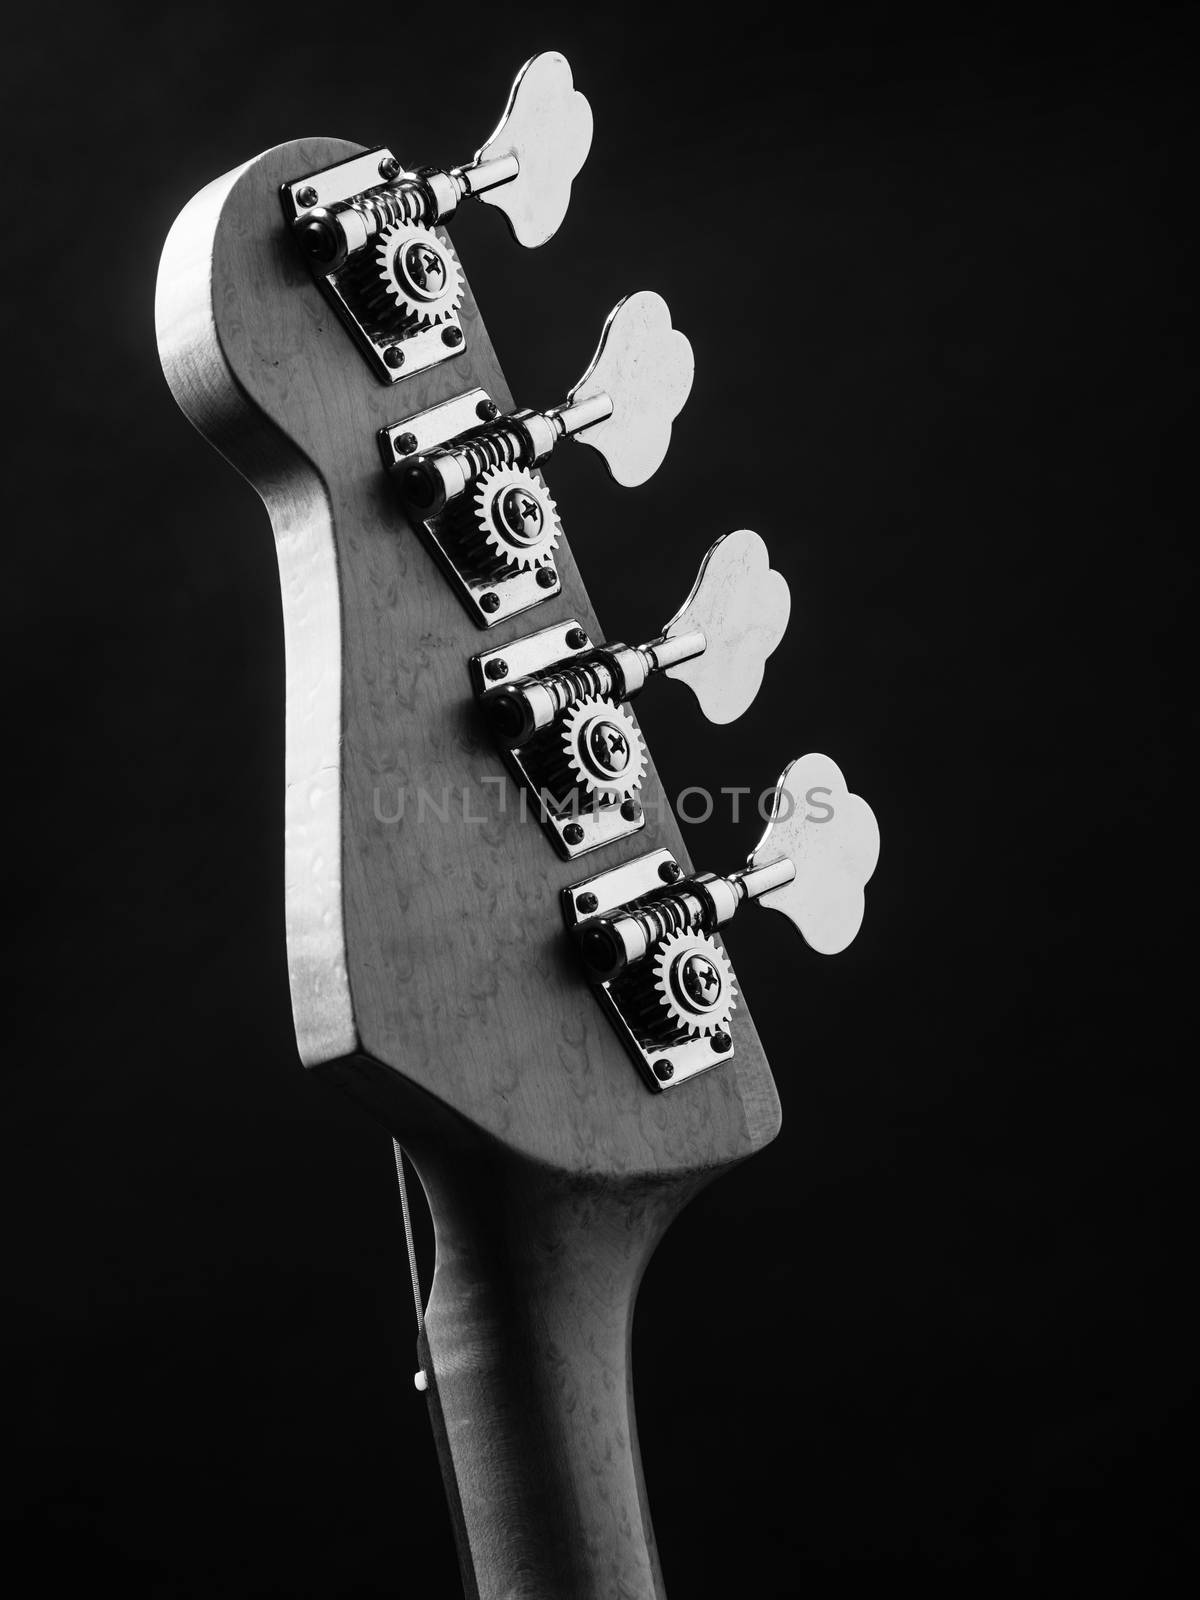 Black and white photo of a bass guitar headstock over black background.